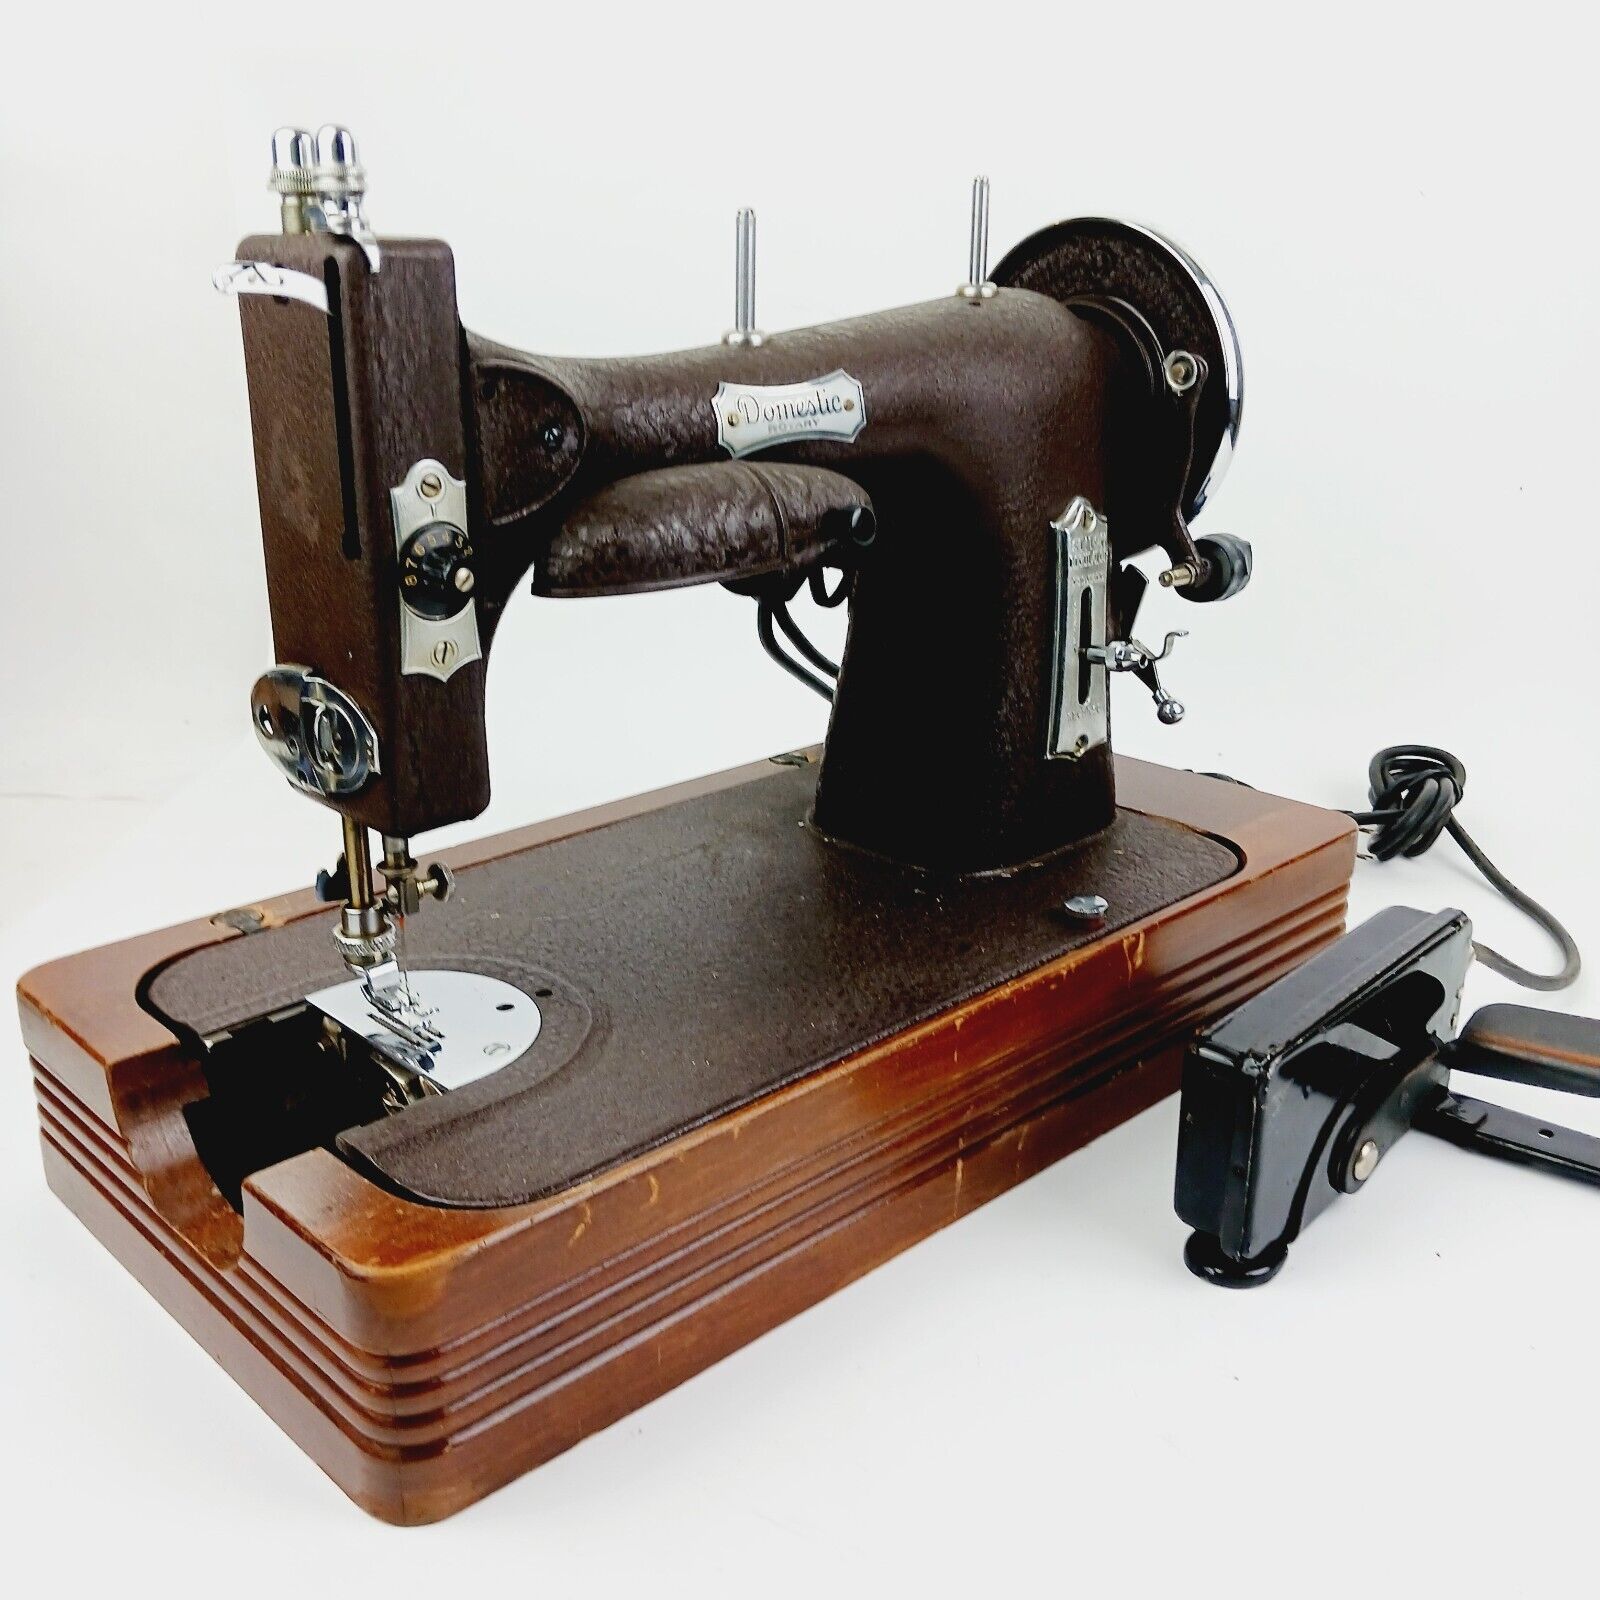 Vintage Domestic Rotary Sewing Machine With Peddle  E-6354 Series 153. With Case